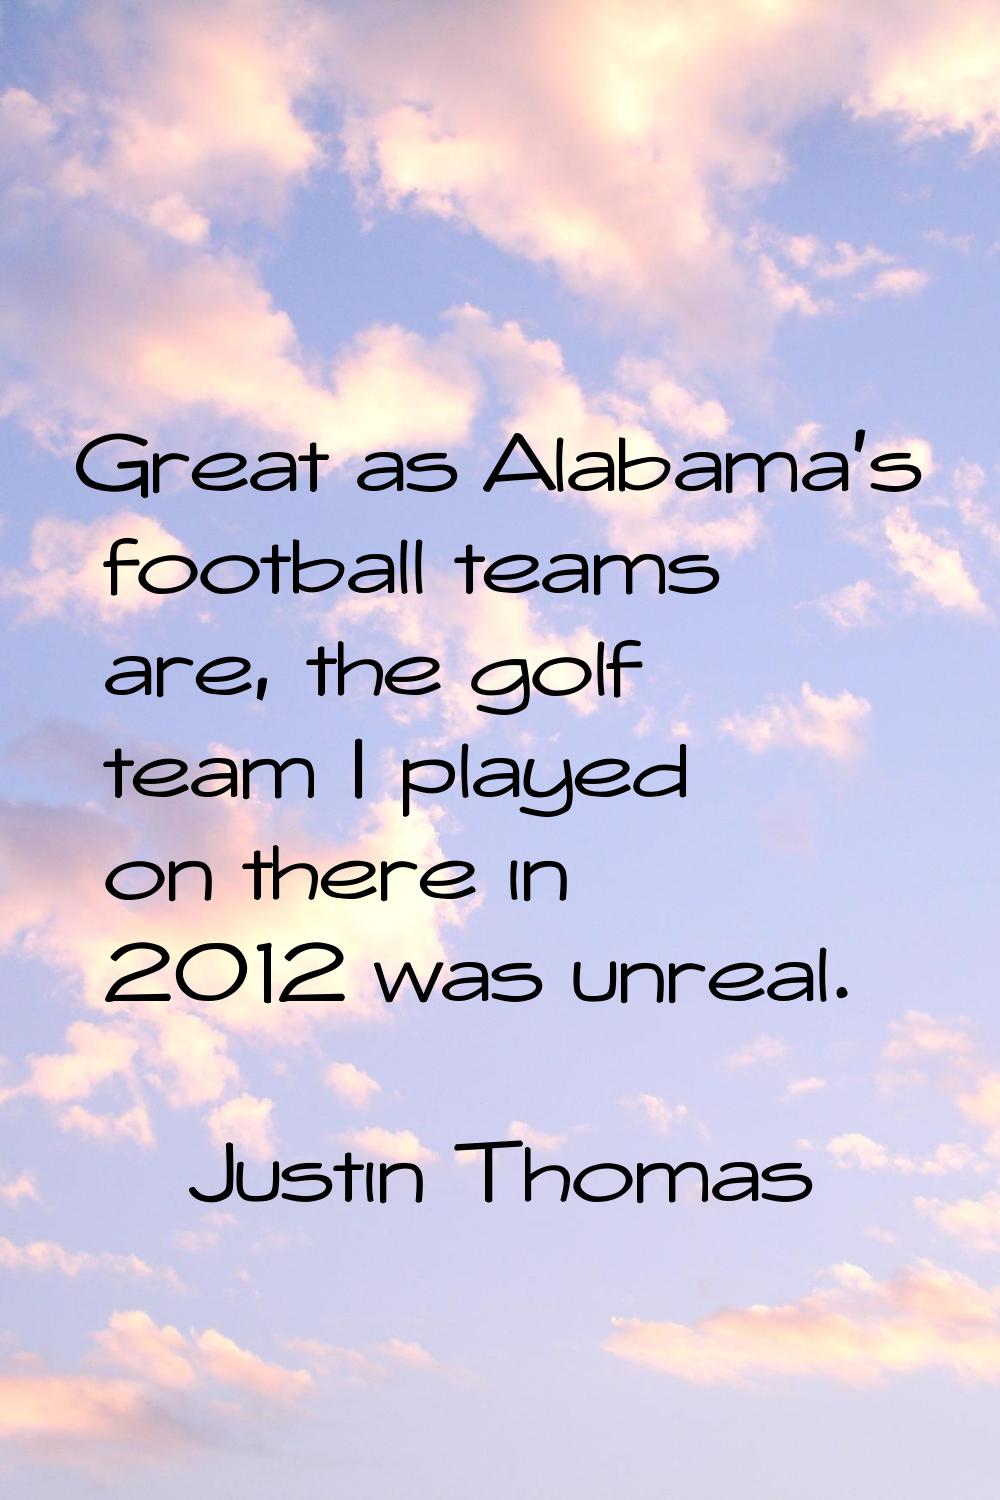 Great as Alabama's football teams are, the golf team I played on there in 2012 was unreal.